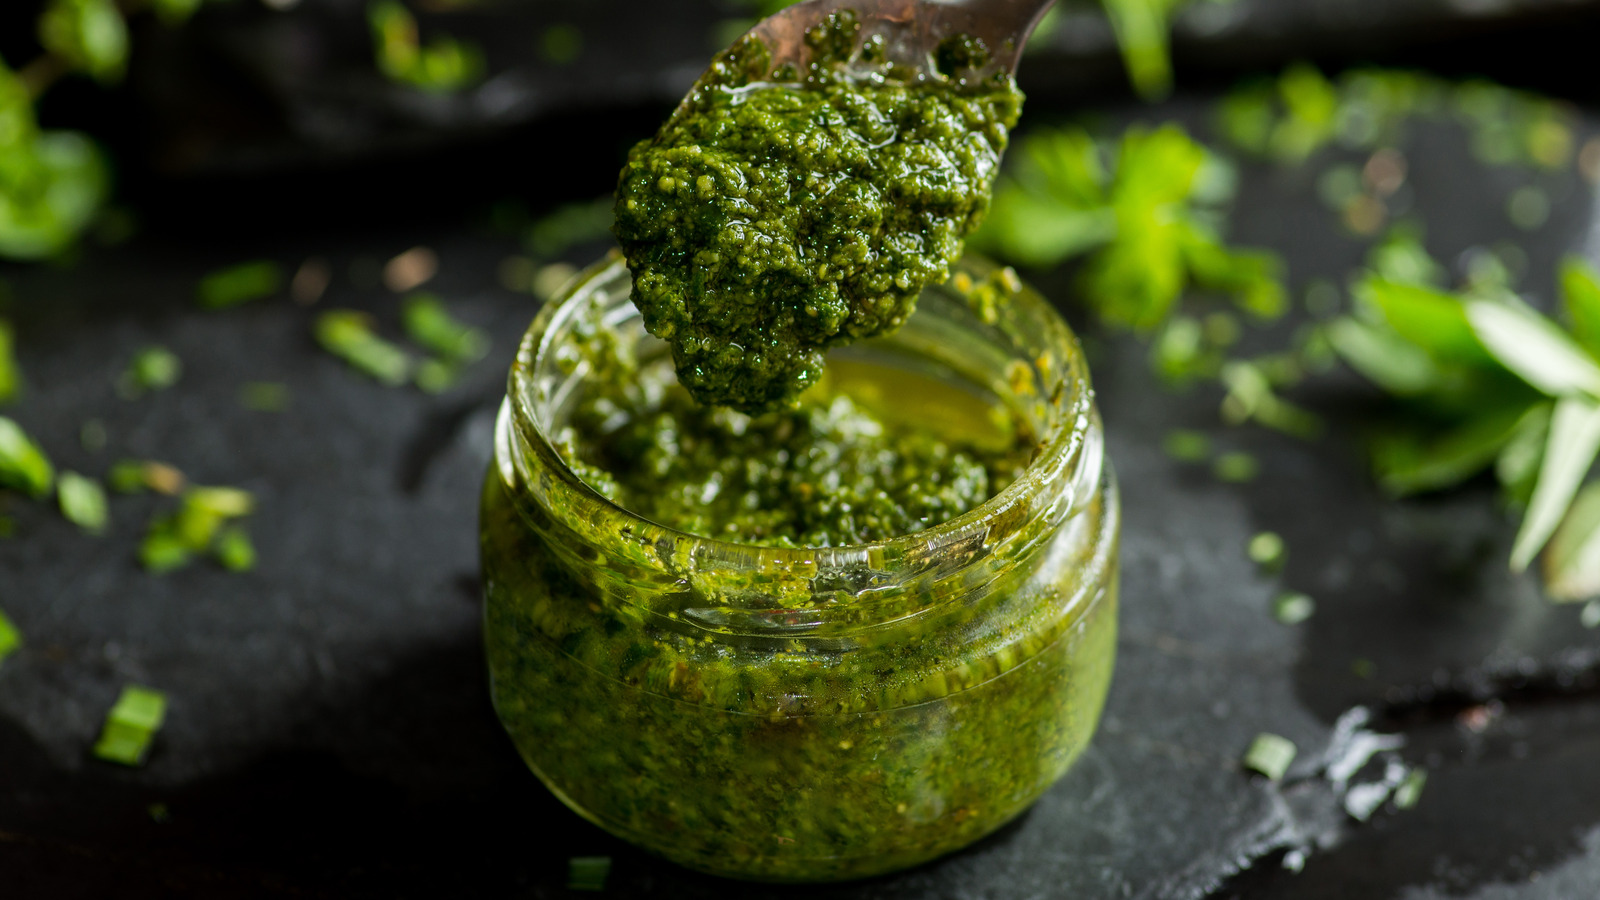 Miso paste is the game-changing ingredient your pesto deserves